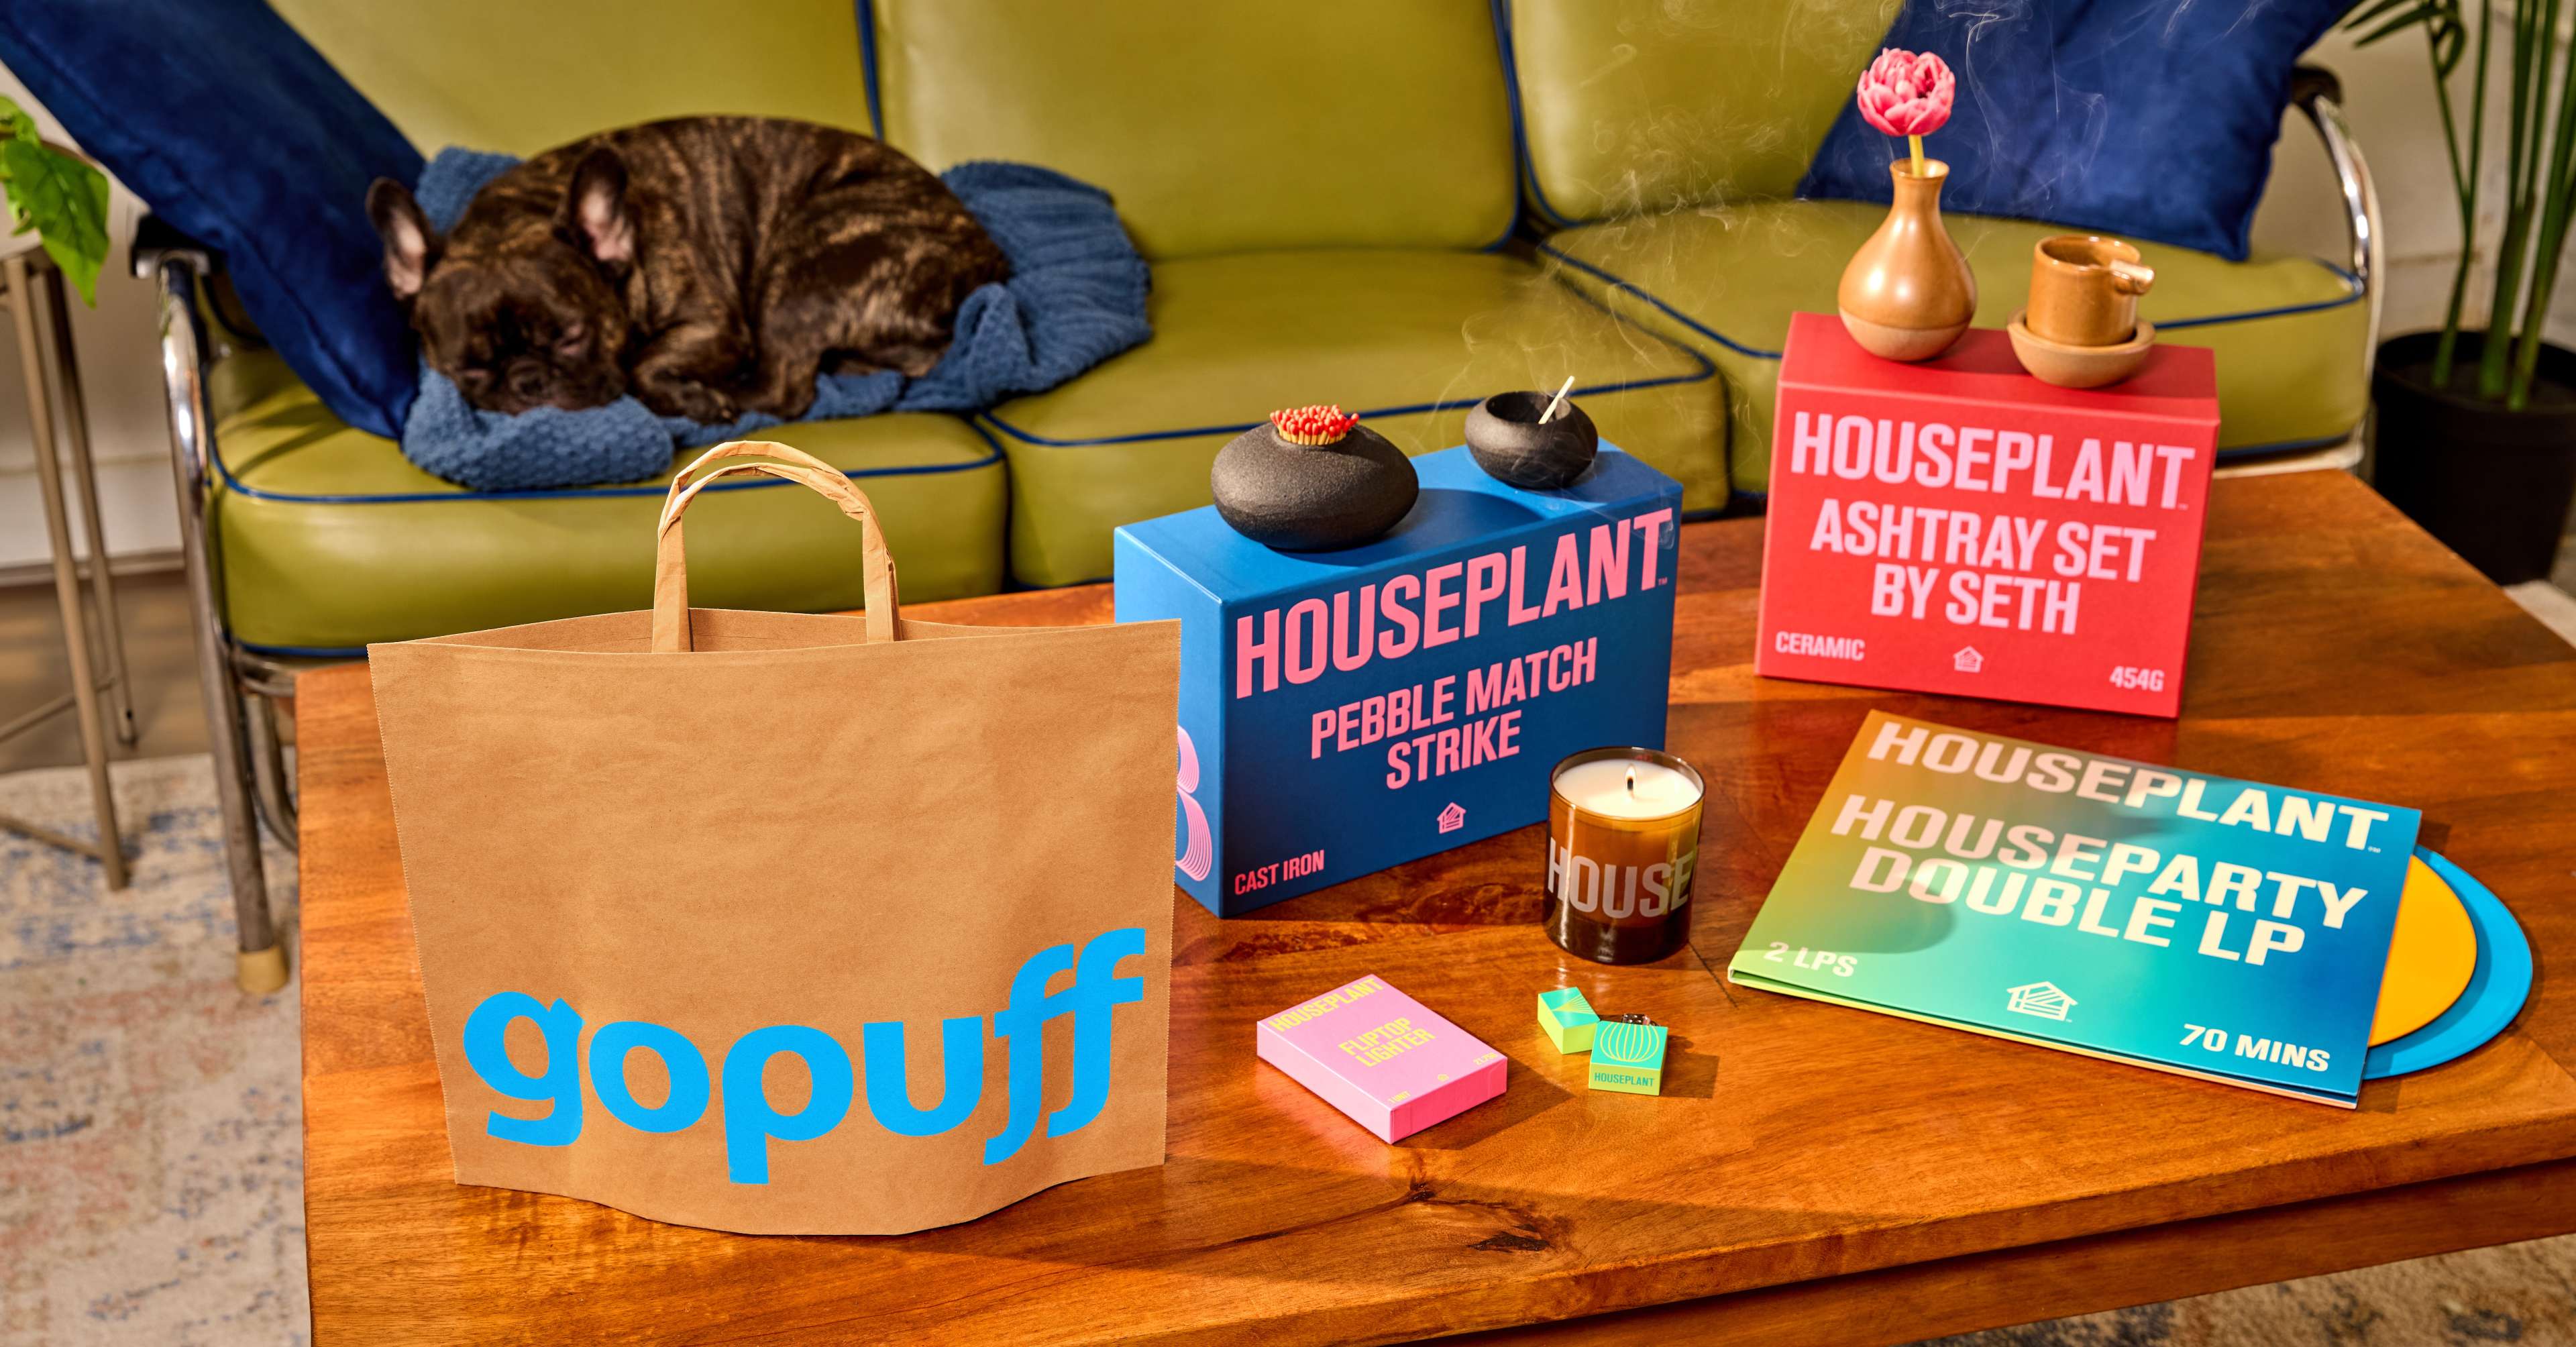 Get Seth Rogen’s Houseplant Products Delivered to Your Door In As Fast As 15 Minutes Thanks to Gopuff 